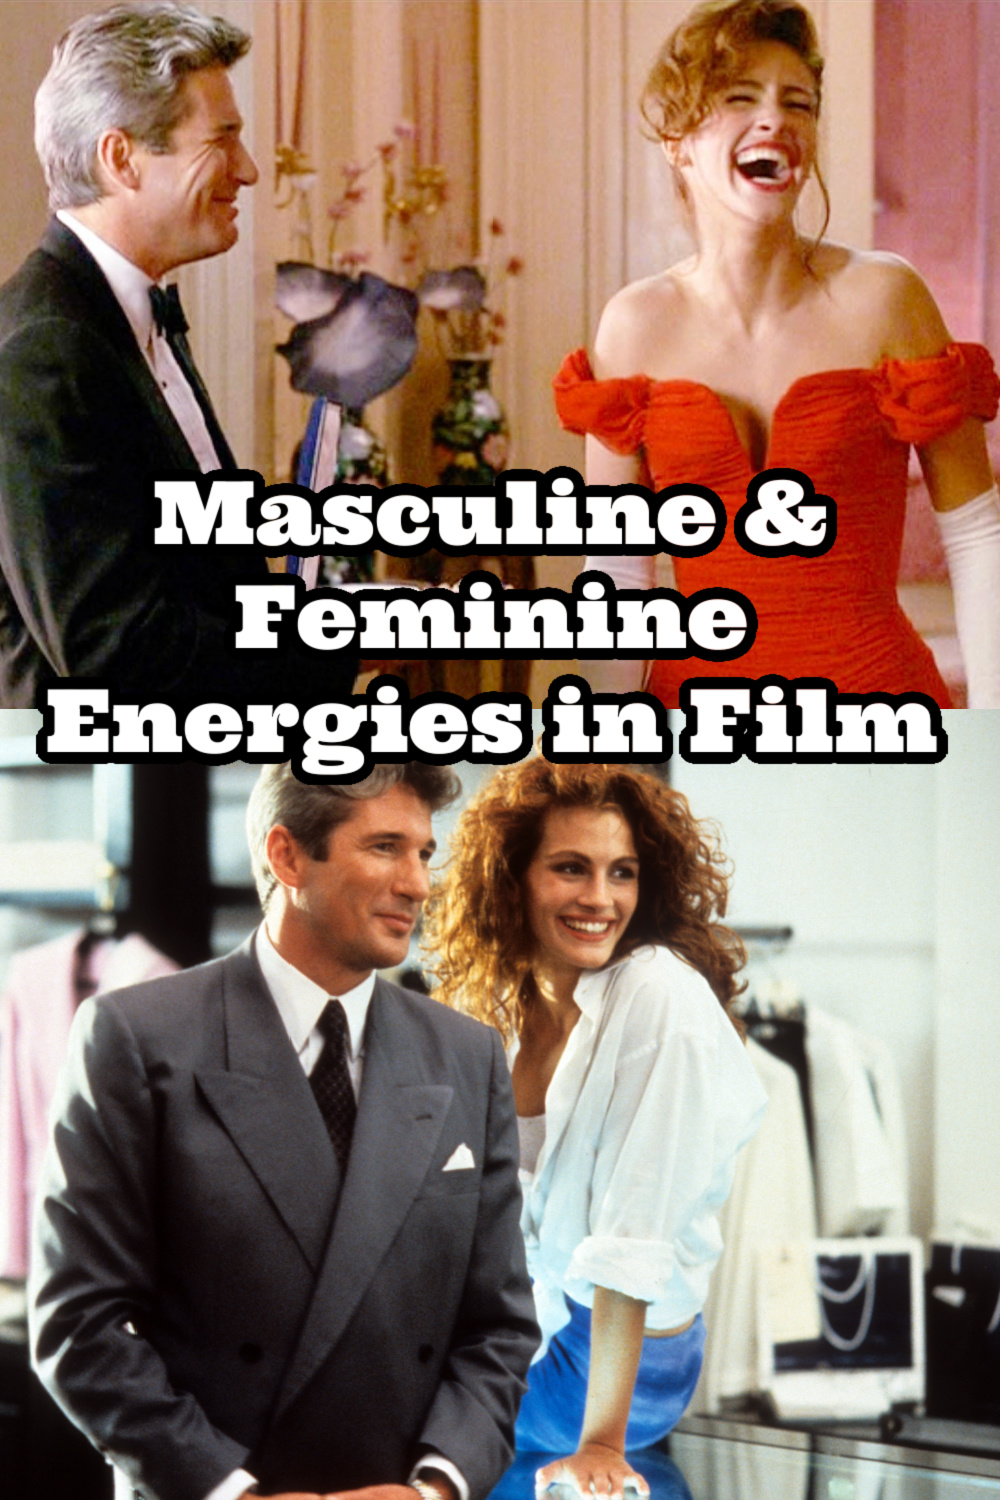 From Masculine Shield to Magnetic Feminine Radiance | Pretty Woman Movie Analysis